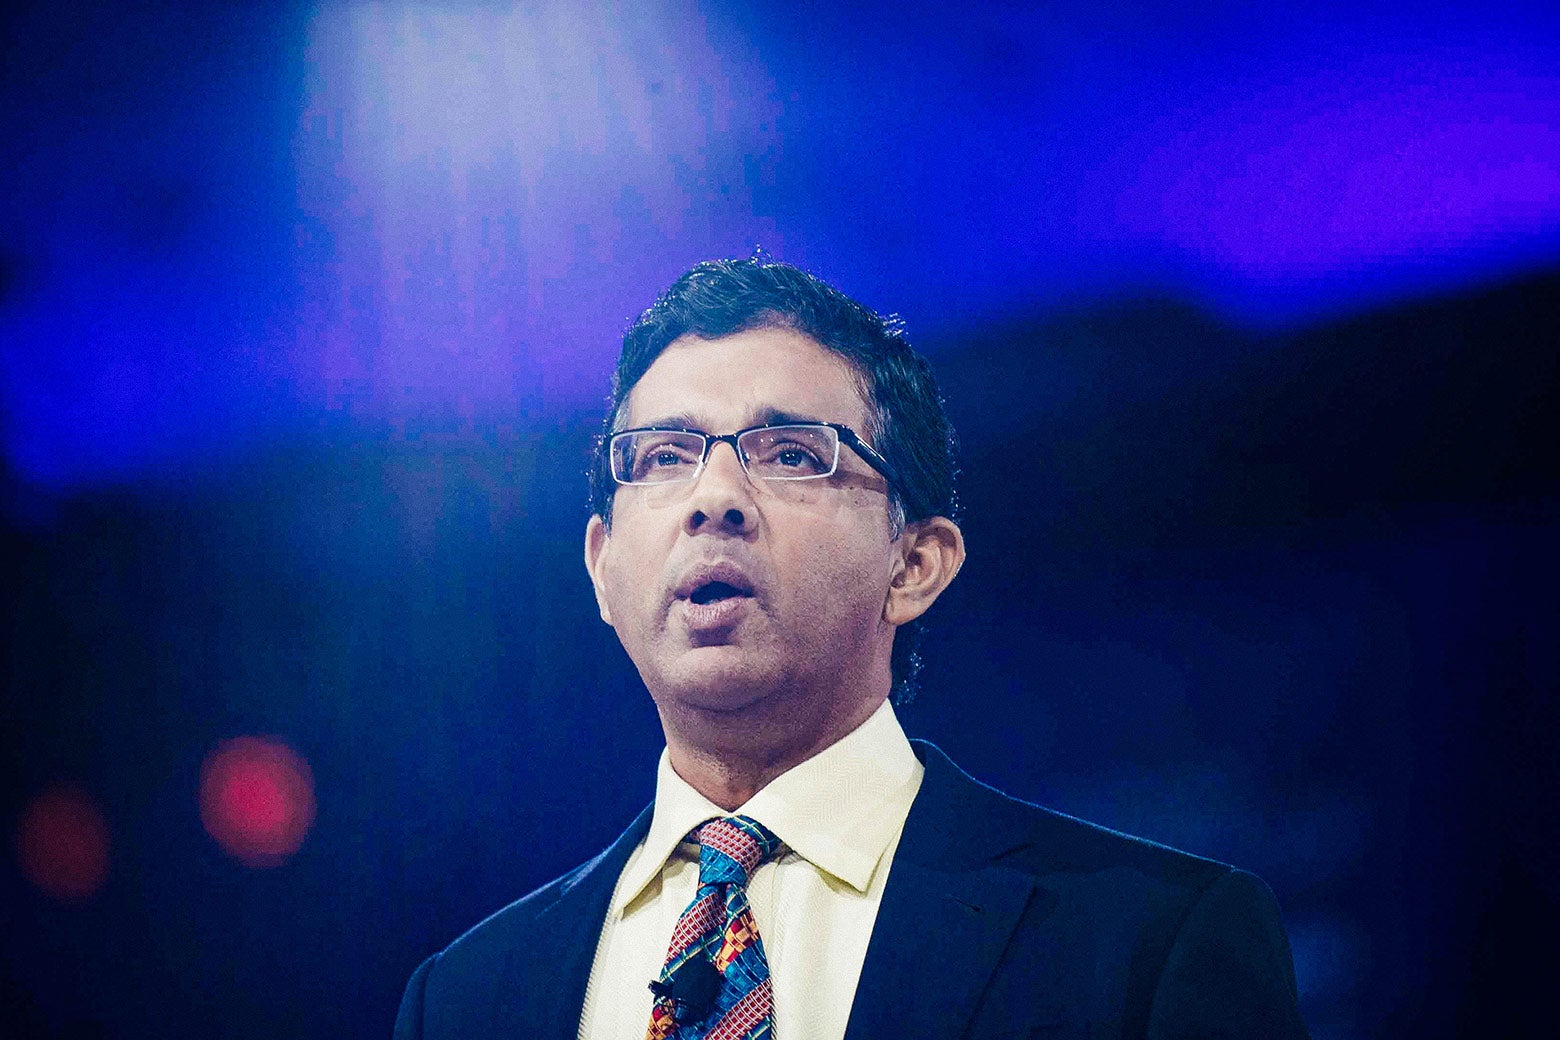 Dinesh D’Souza speaks at CPAC in National Harbor, Maryland, on March 5, 2016.